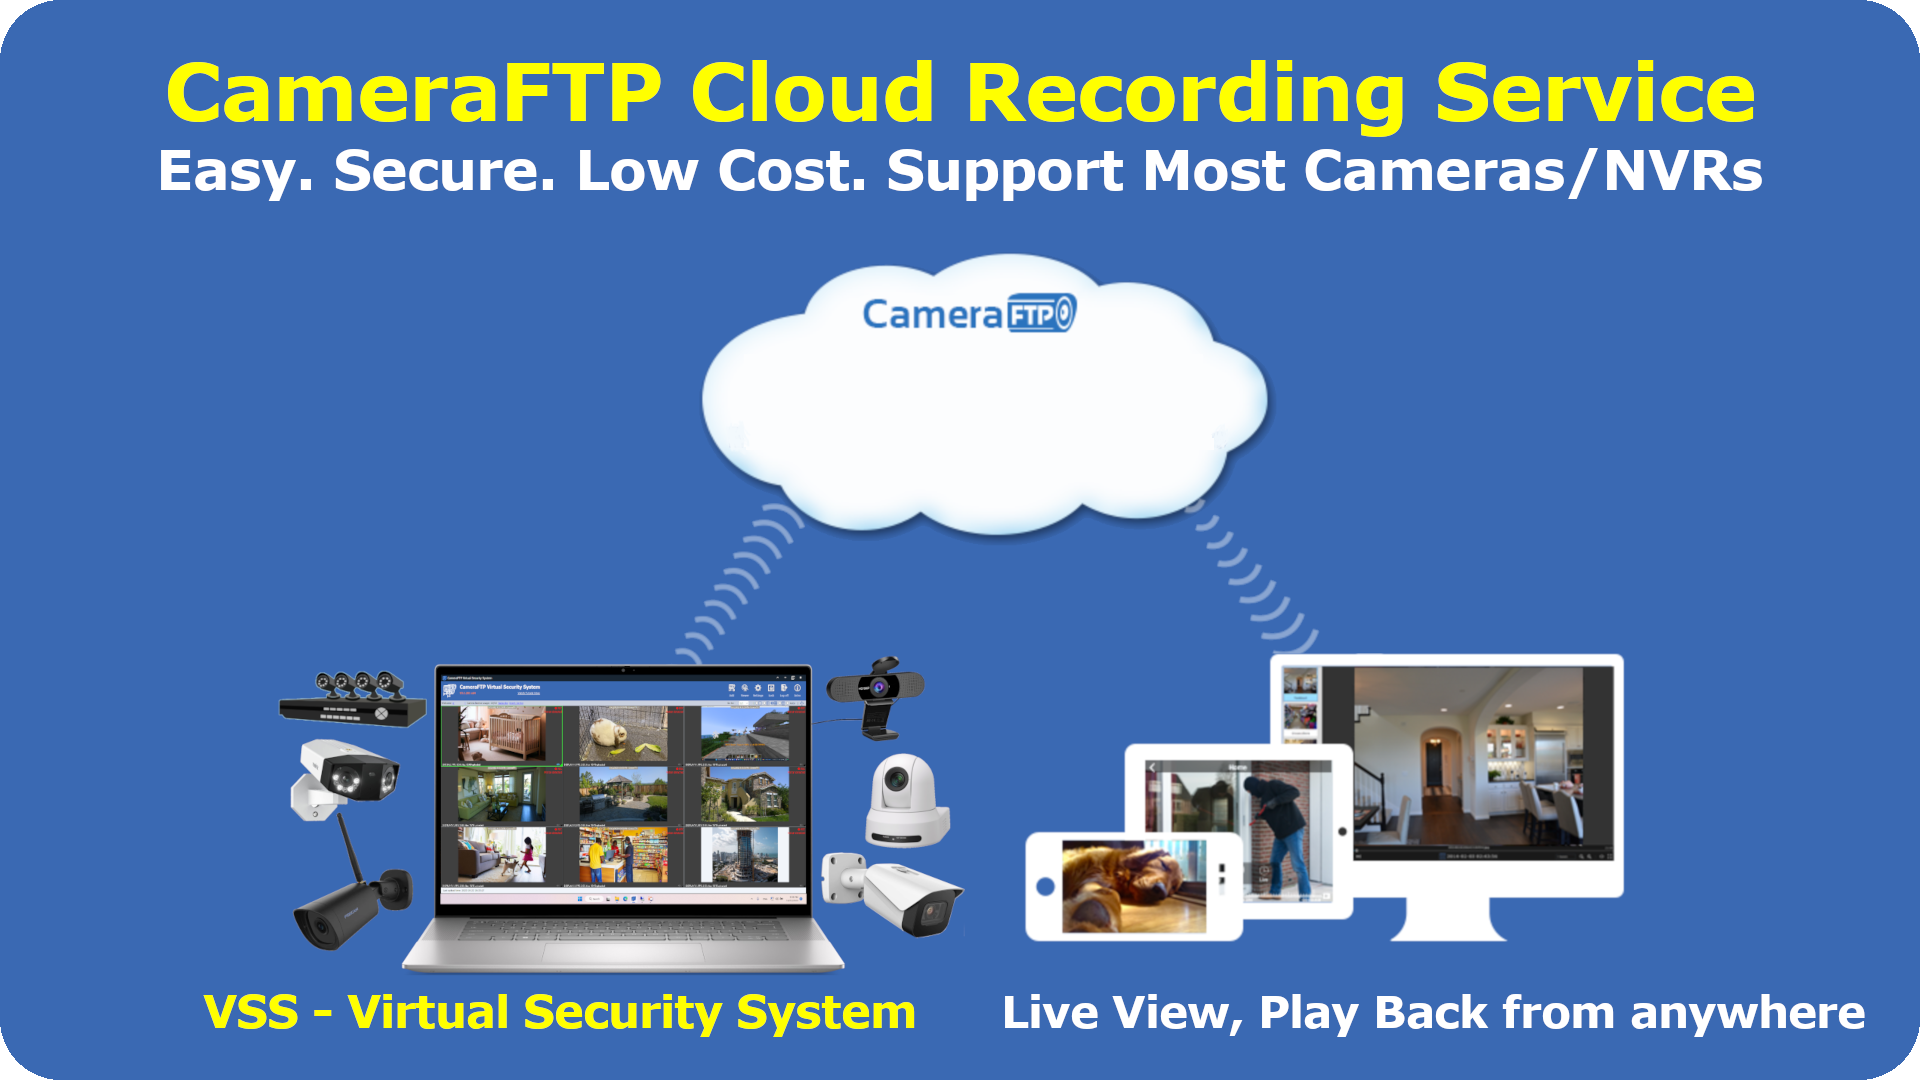 About CameraFTP Cloud Recording service and CameraFTP VSS Software